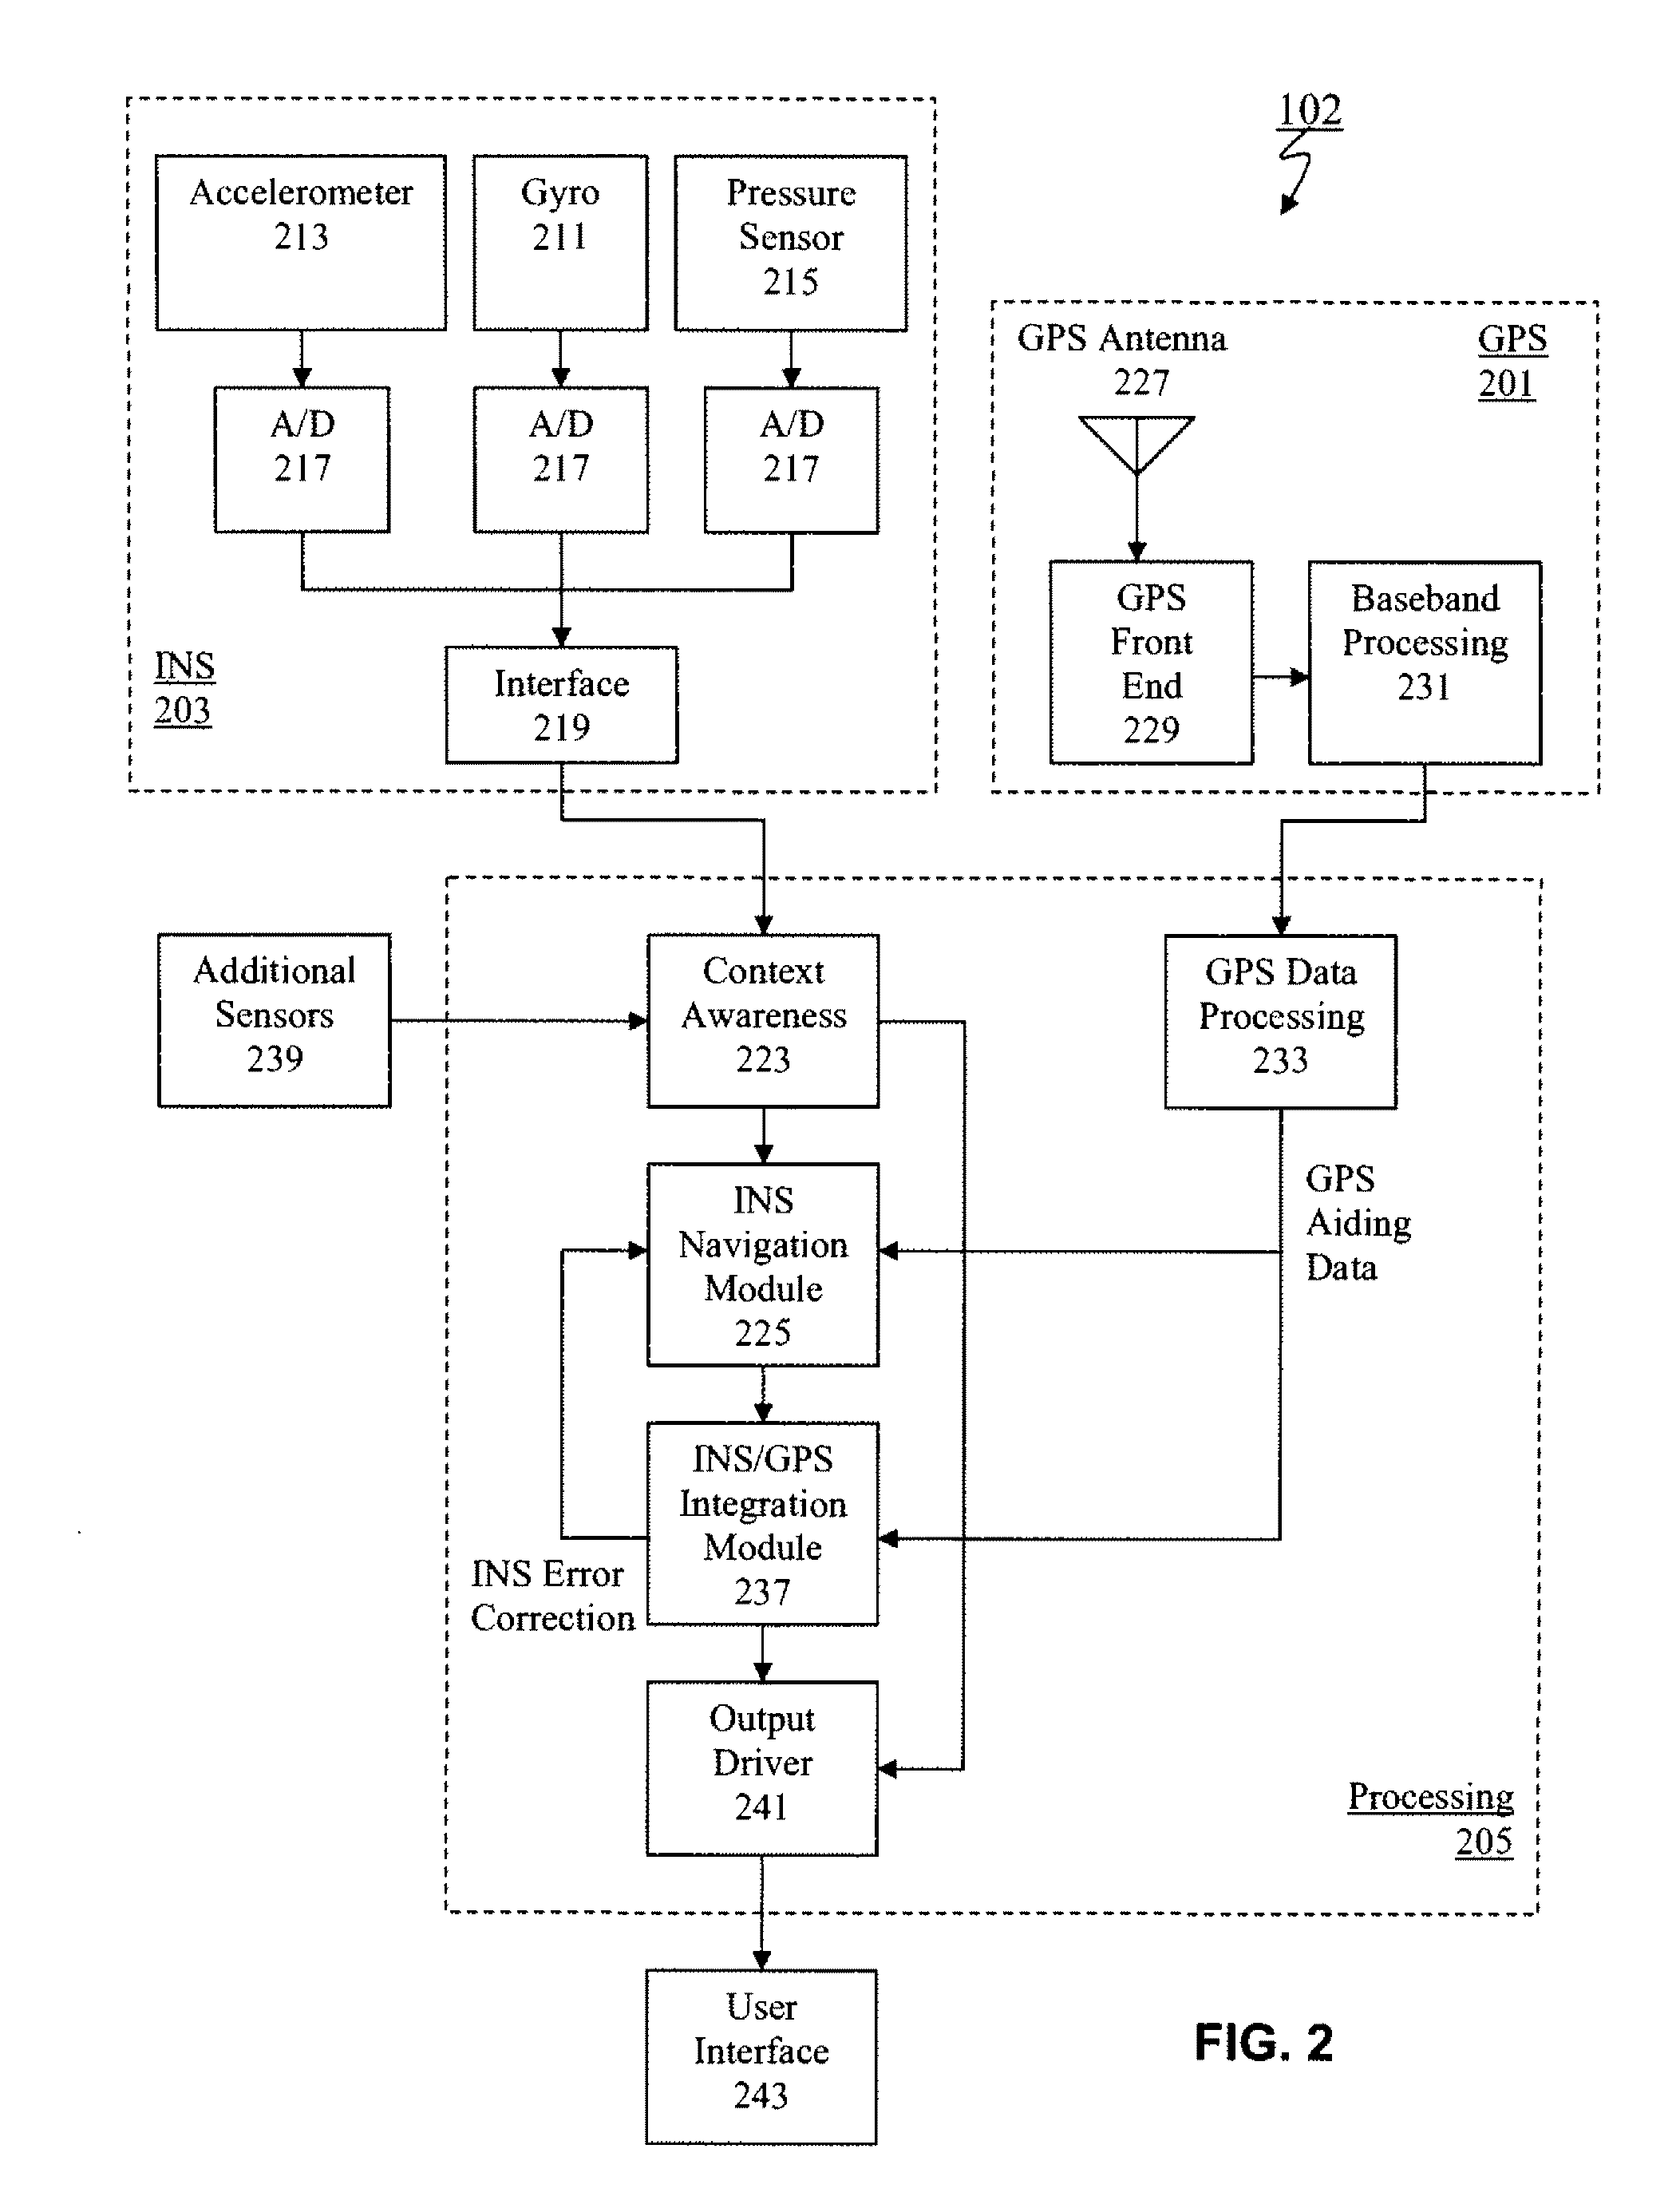 Methods and applications for altitude measurement and fusion of user context detection with elevation motion for personal navigation systems